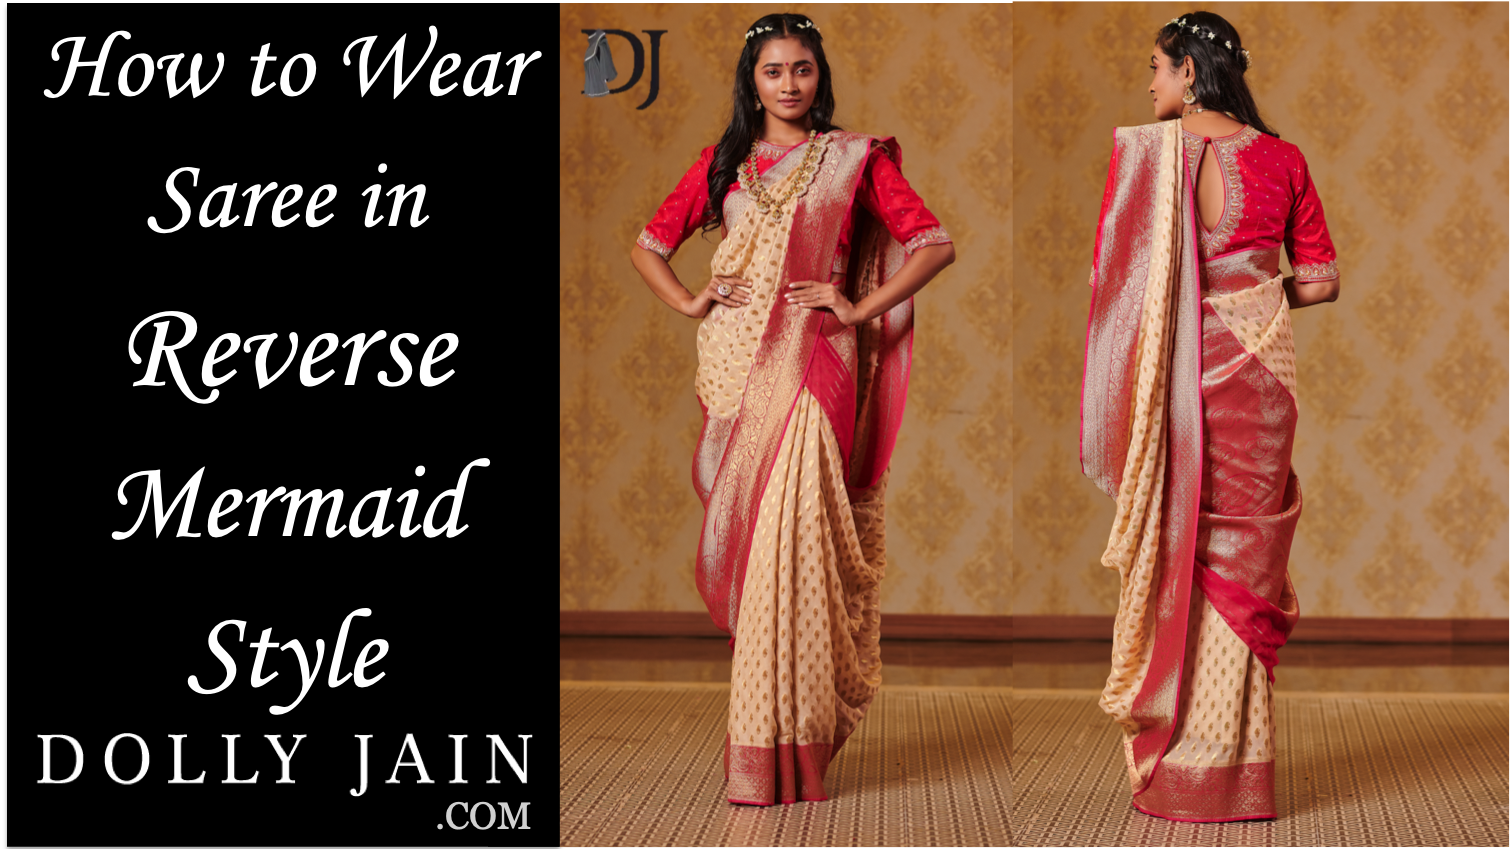 How to wear a saree like a gown for party  Dolly Jain Saree Draping styles  